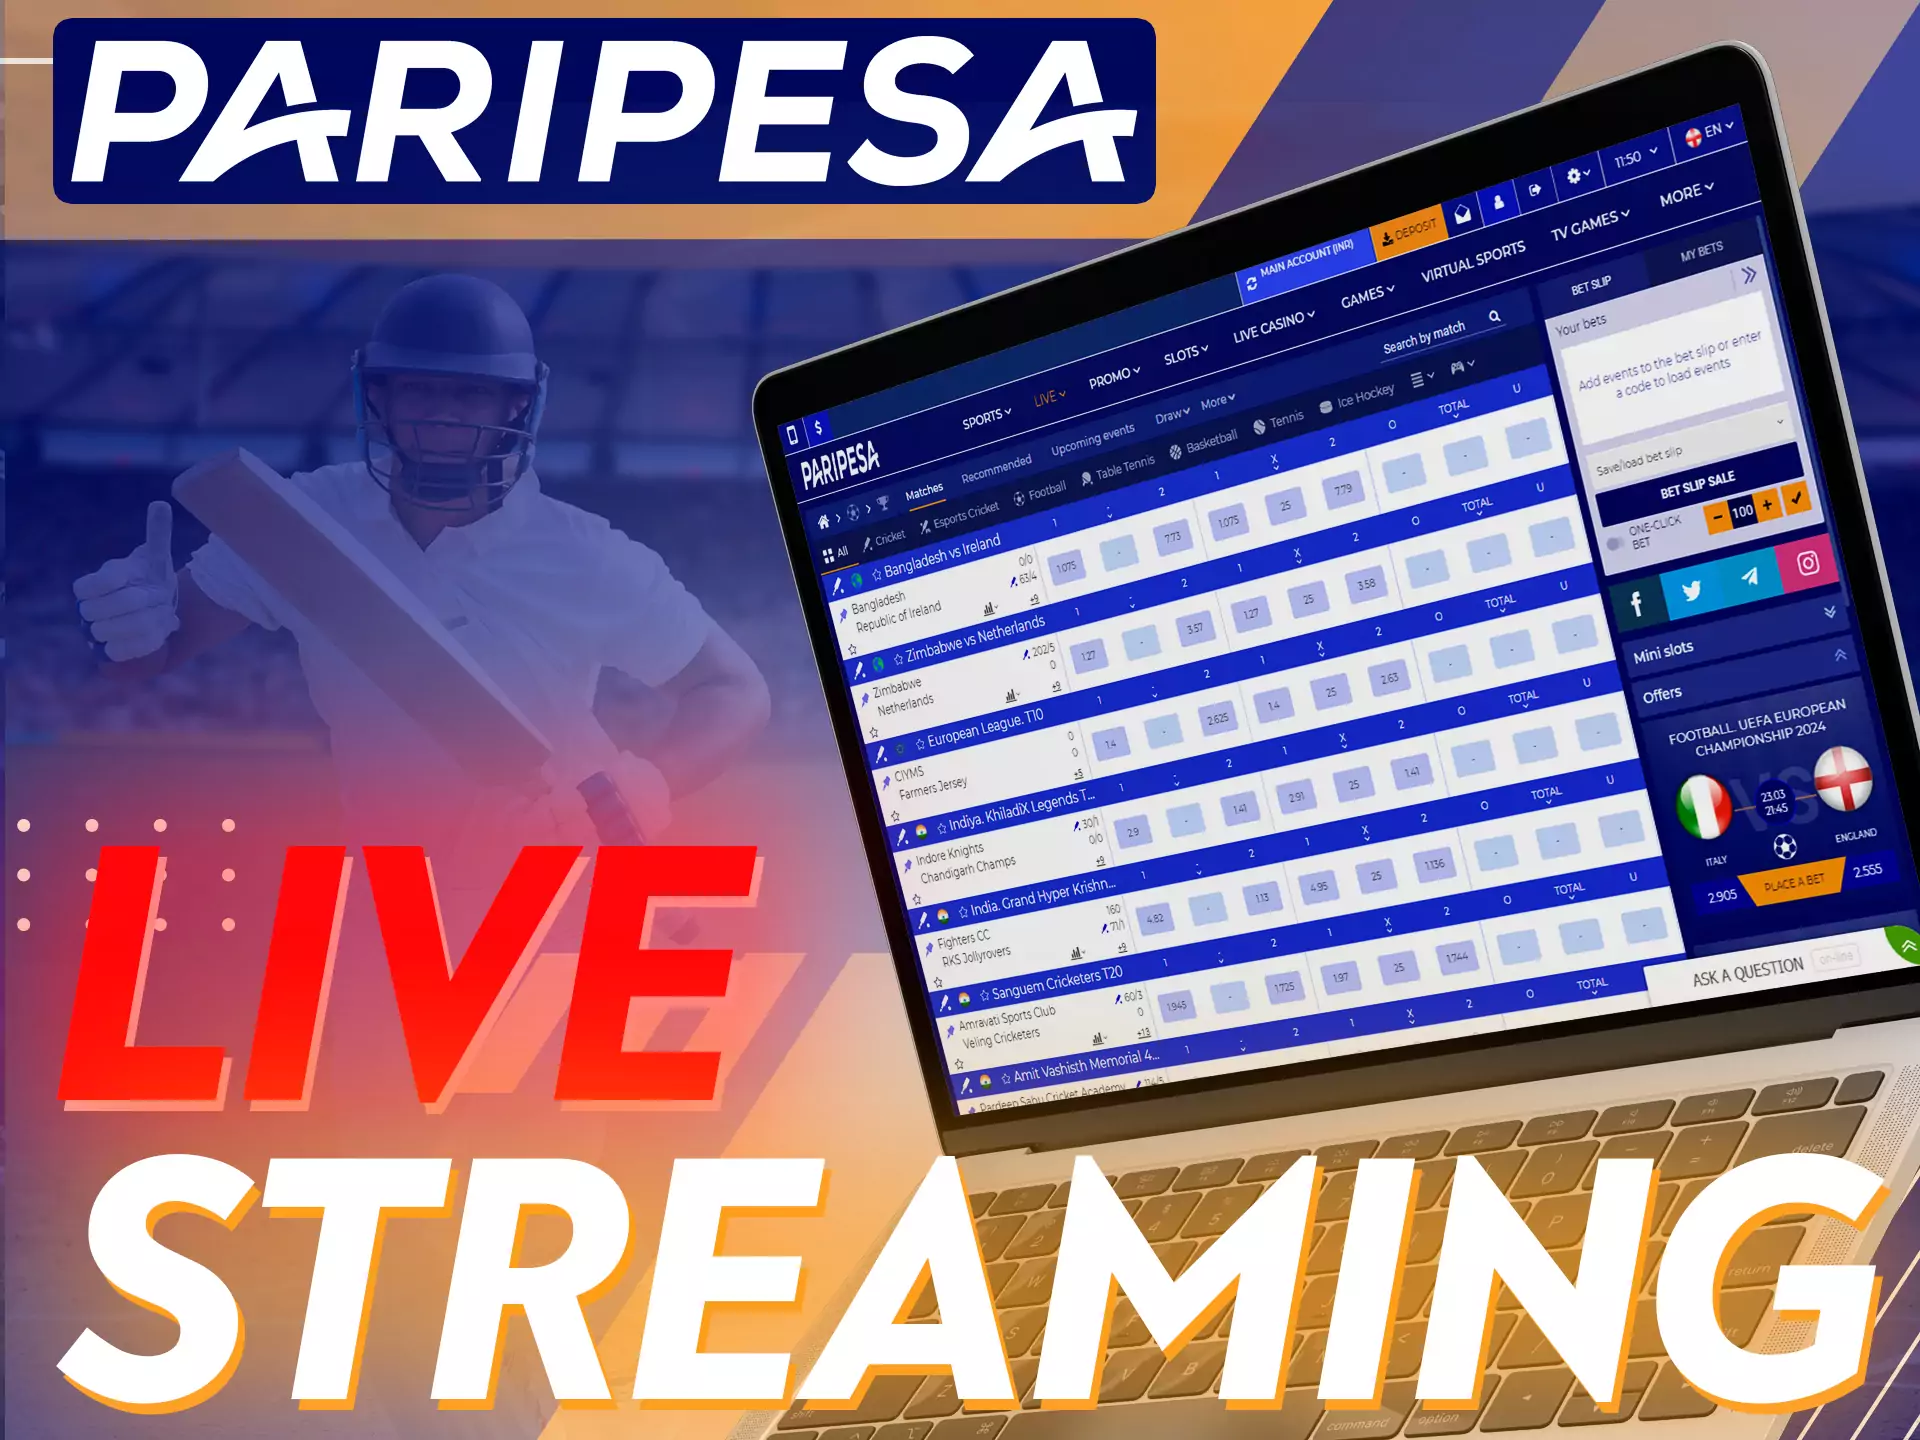 At Paripesa you can bet on sports while live streaming matches.